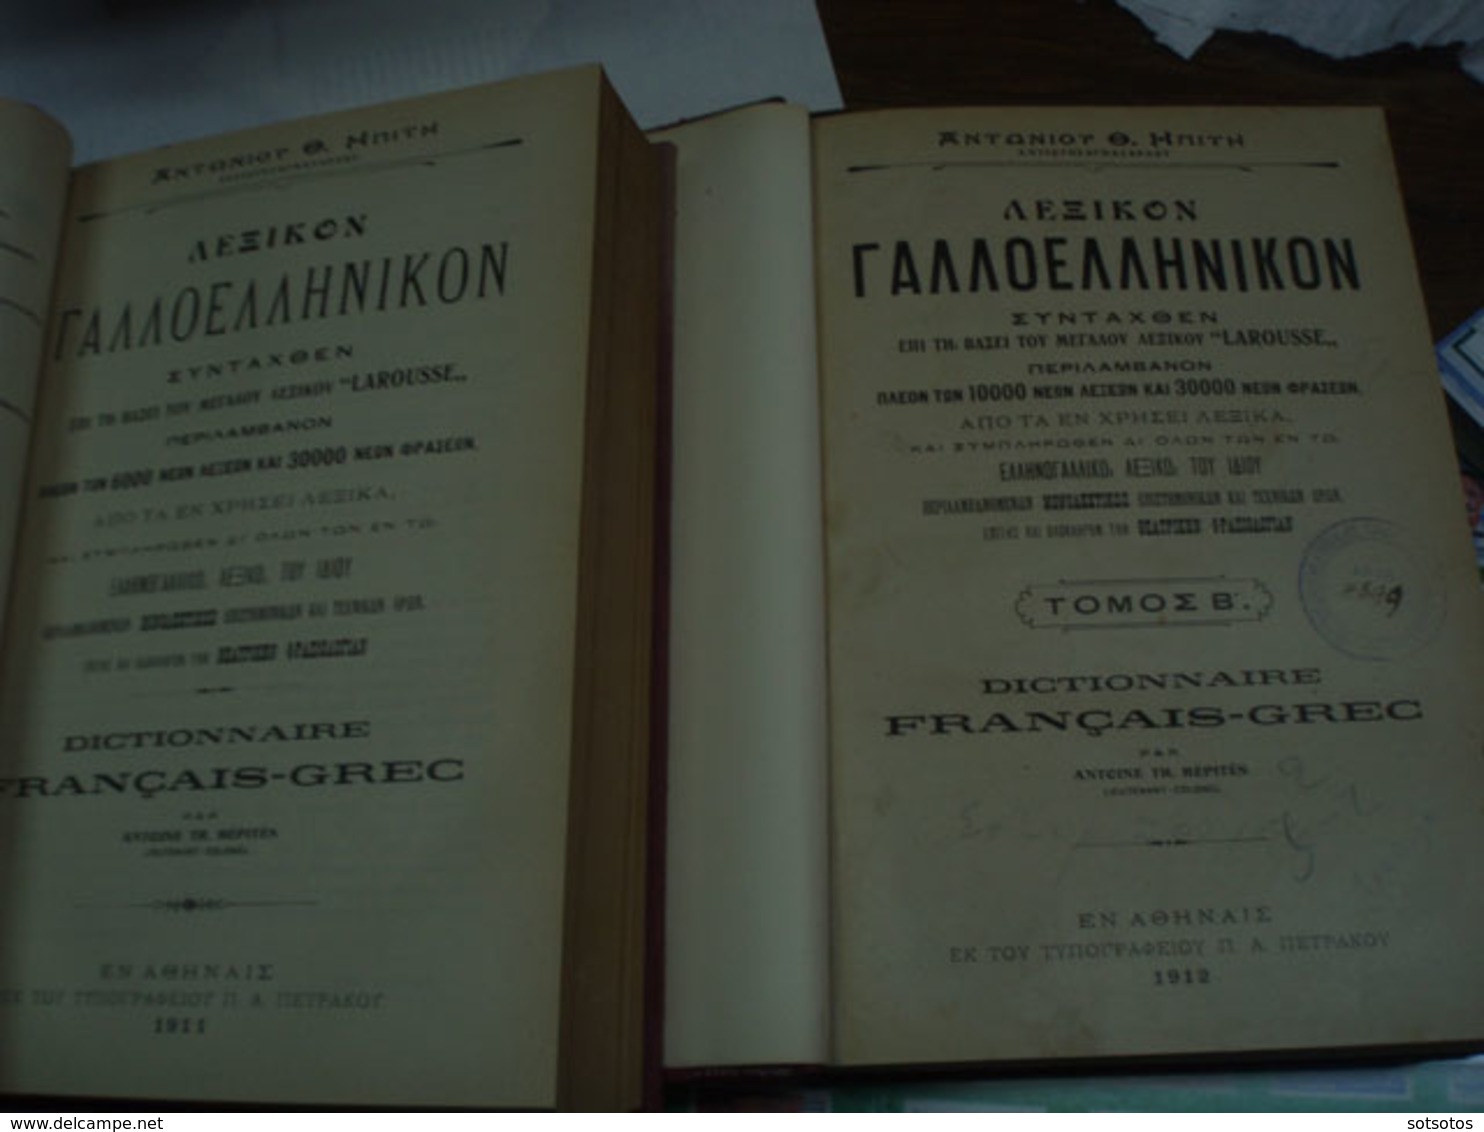 FRANCAIS-GREC: Ant. IPITI -  A' Vol. (1911) 1248+48 Pages, B' Vol.  (1912) 1344 Pages - Very Rare - Woordenboeken